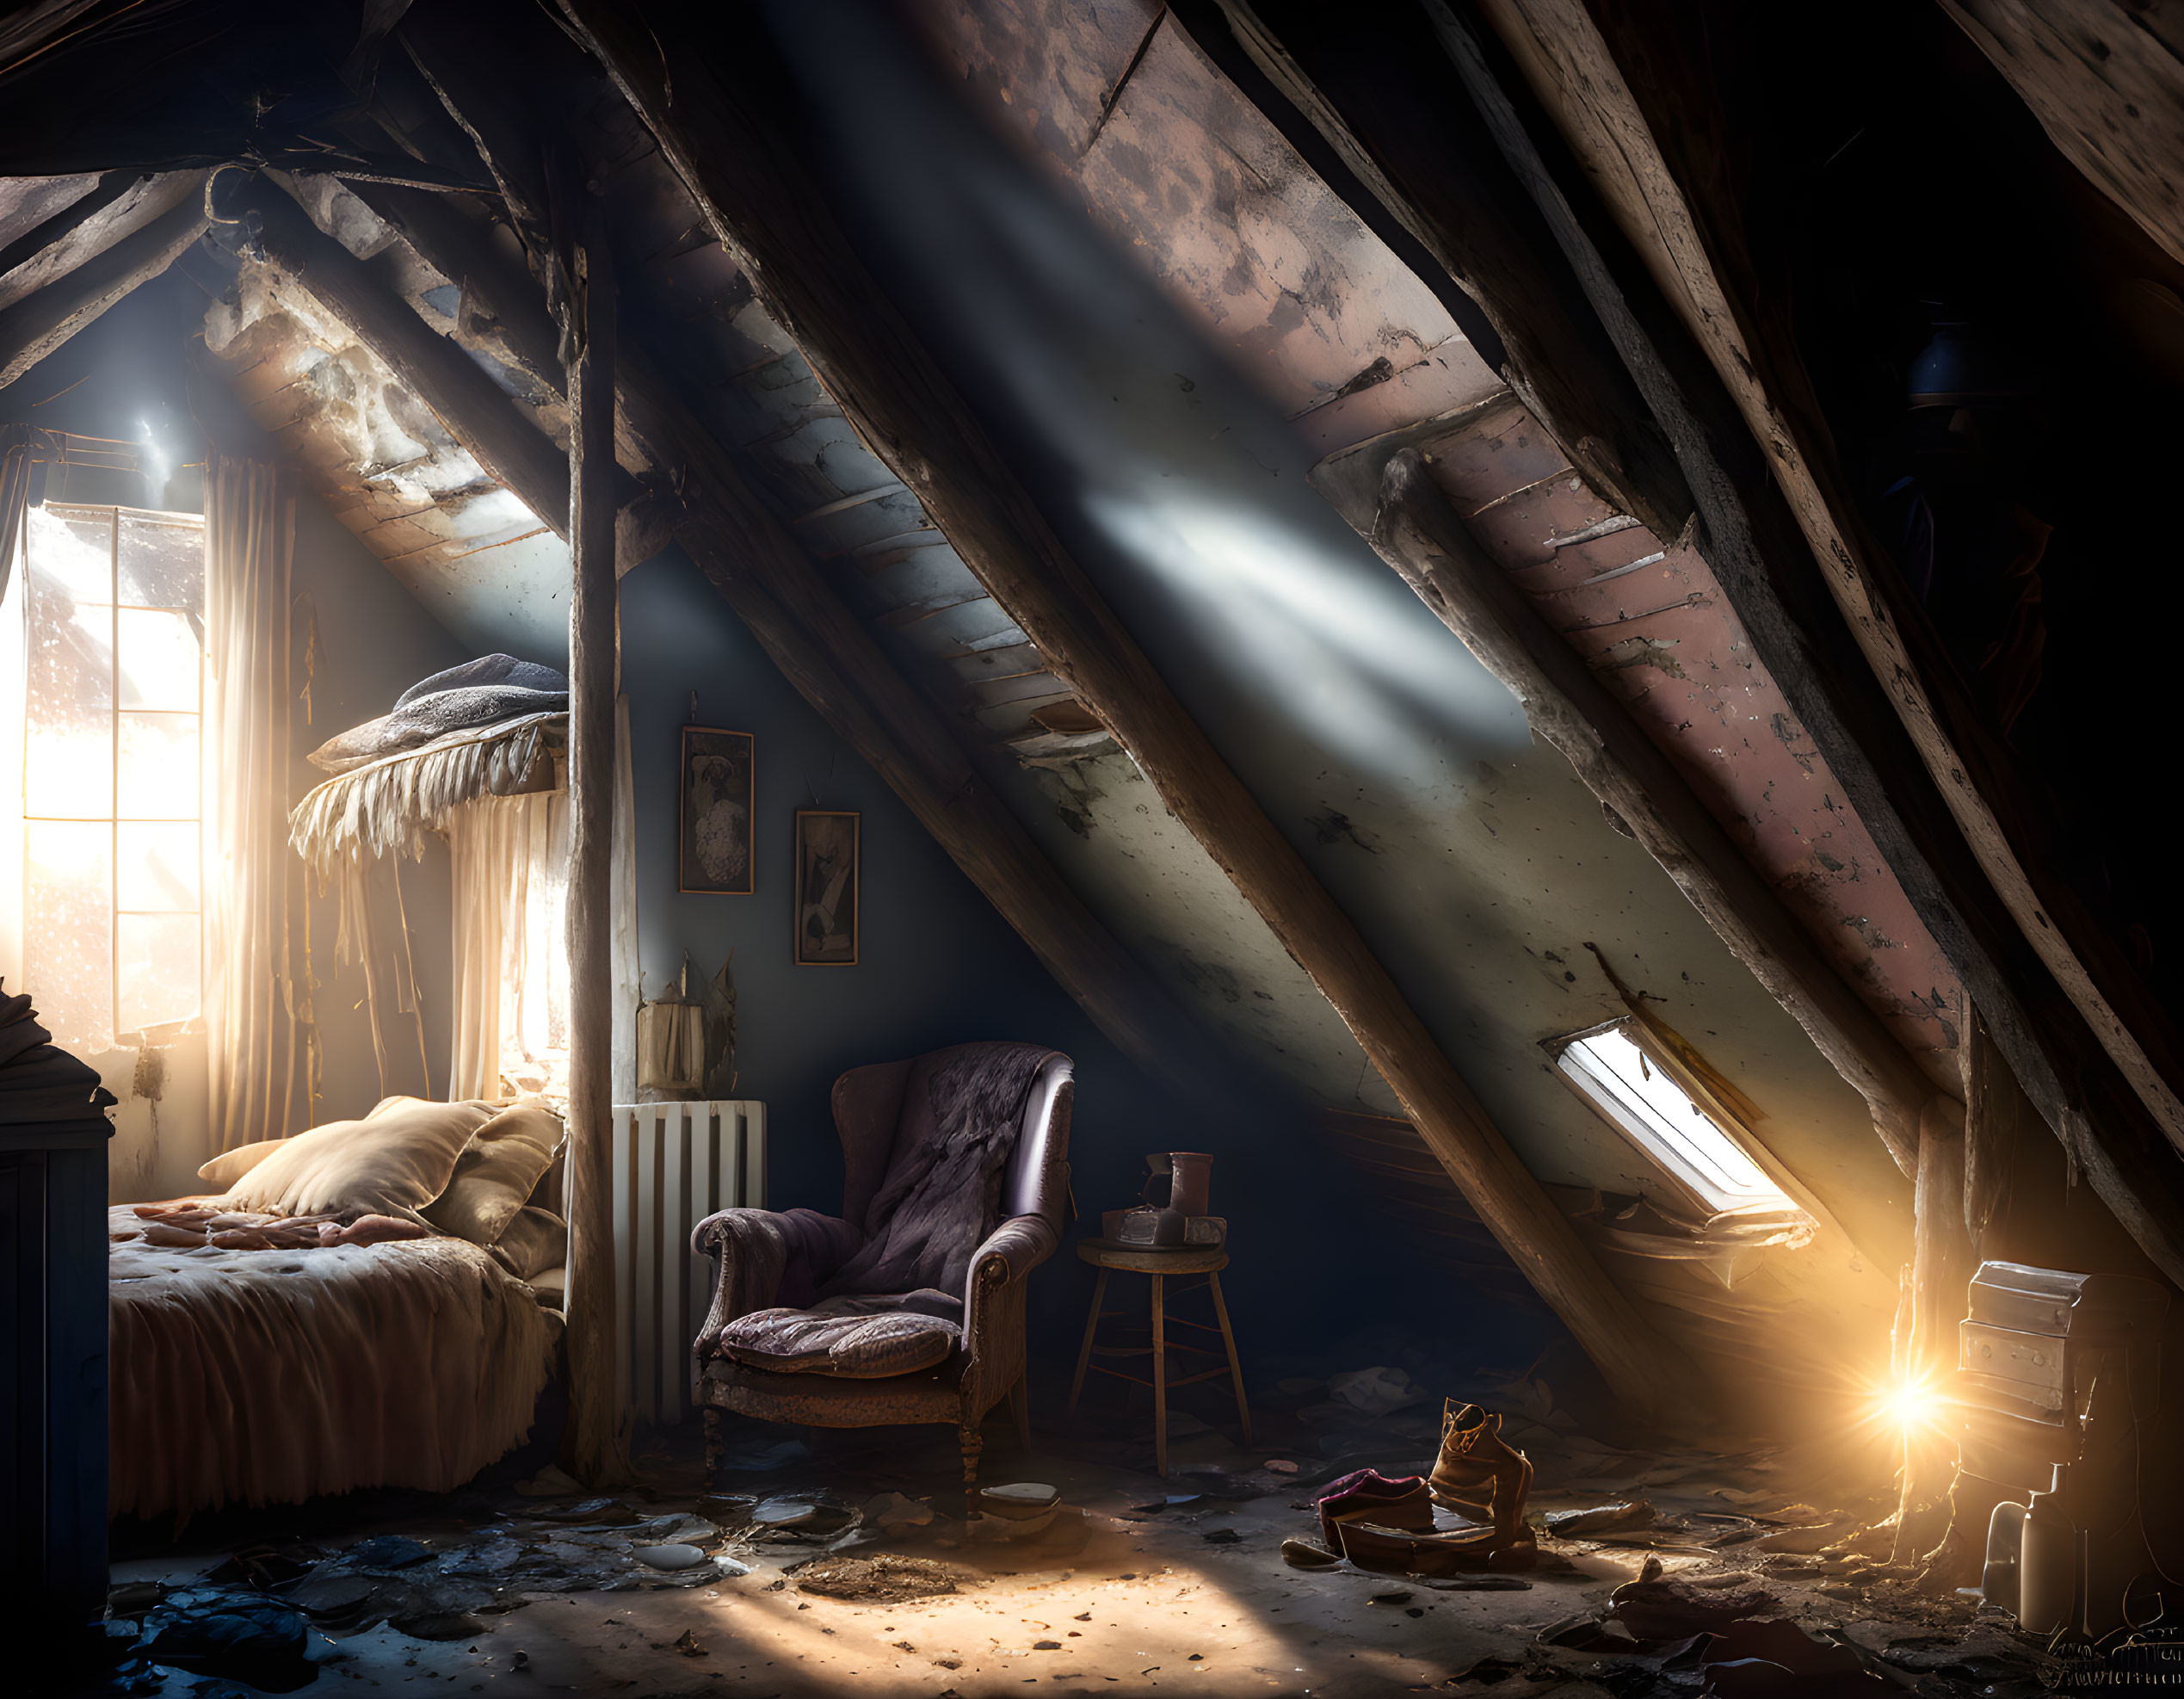 Cozy attic room with bed, armchair, wood stove, and sunlight rays